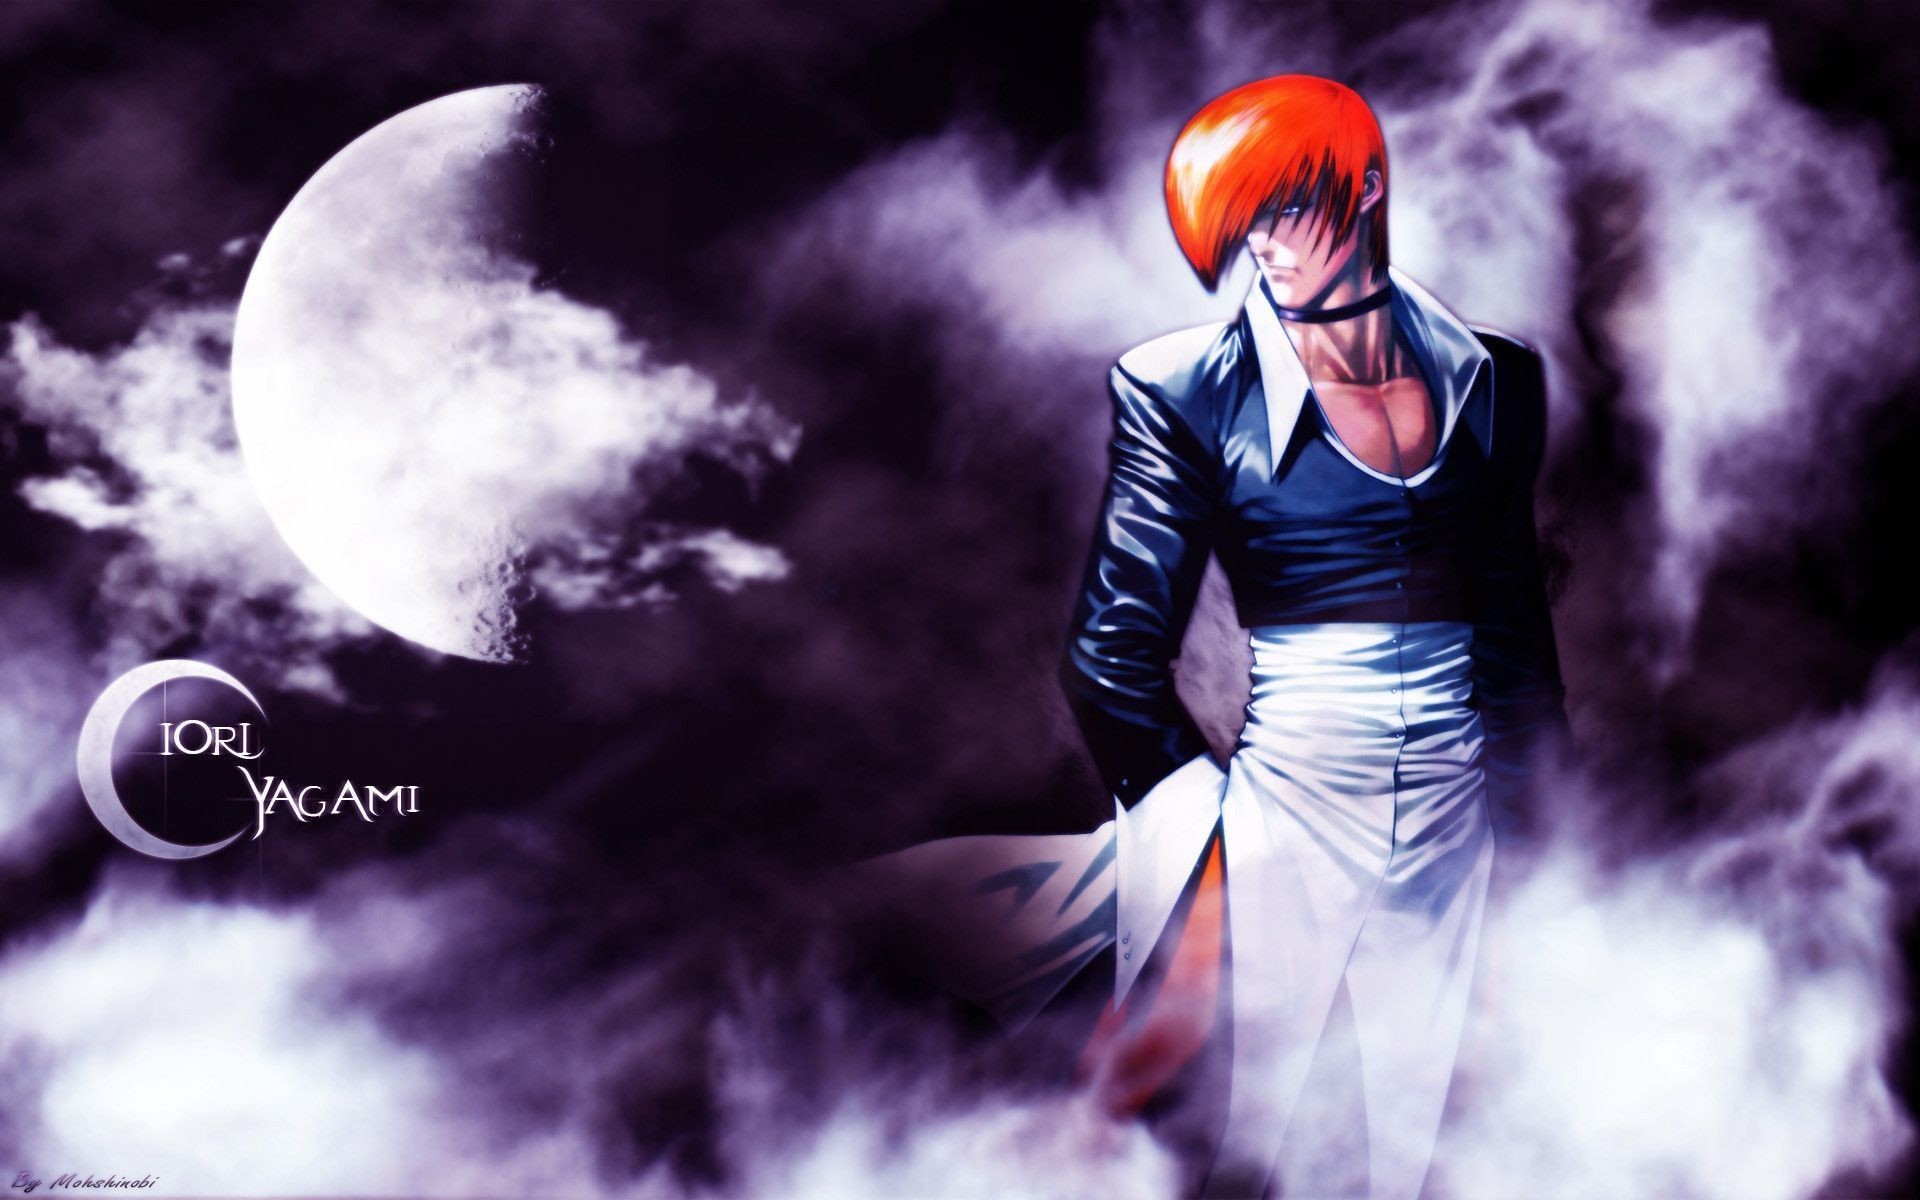 1920x1200 King Of Fighters Wallpapers - Wallpaper Cave